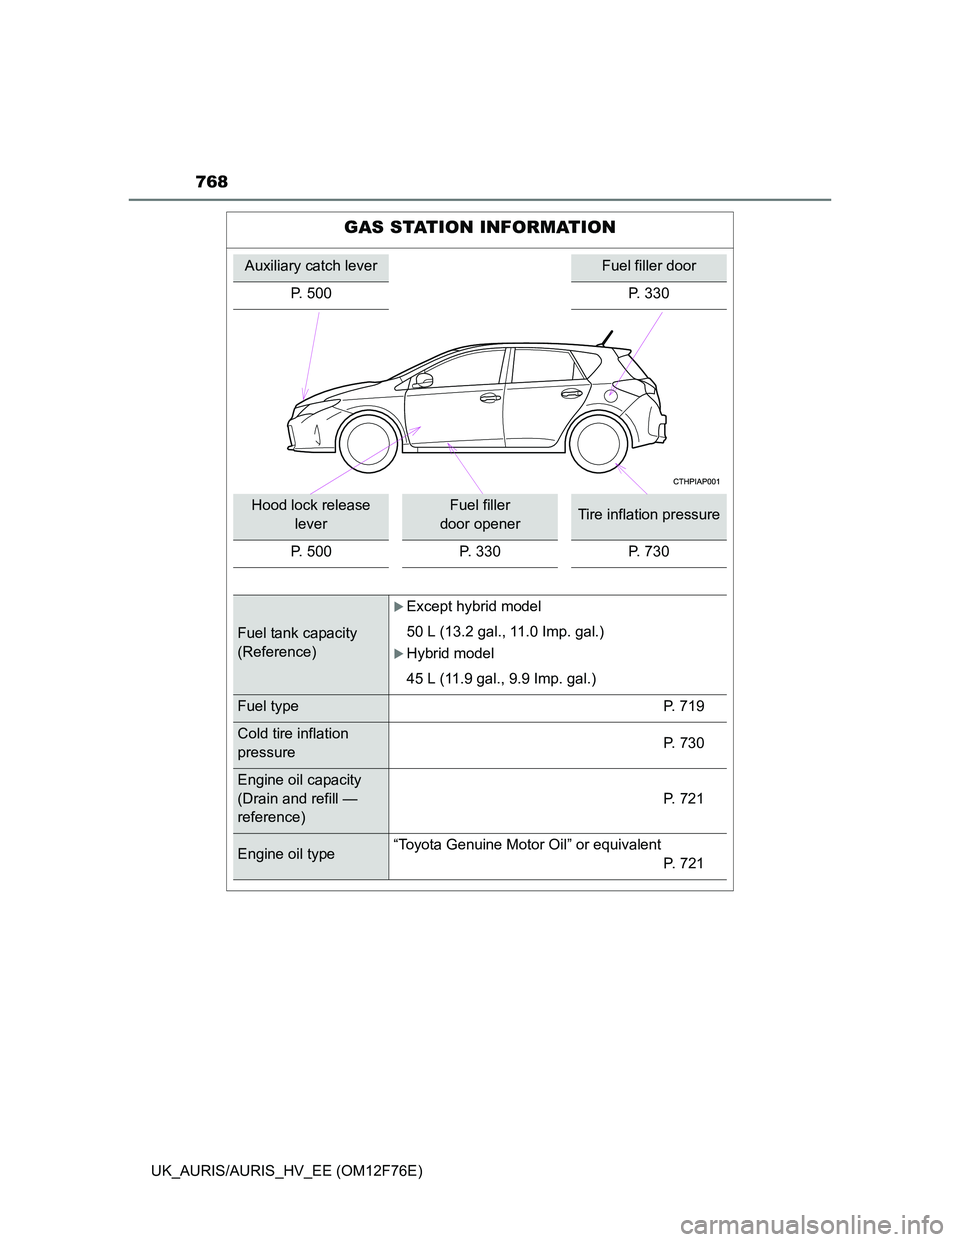 TOYOTA AURIS 2013  Owners Manual (in English) 768
UK_AURIS/AURIS_HV_EE (OM12F76E)
GAS STATION INFORMATION
Auxiliary catch leverFuel filler door
P. 500 P. 330
Hood lock release 
leverFuel filler 
door openerTire inflation pressure
P. 500 P. 330 P.